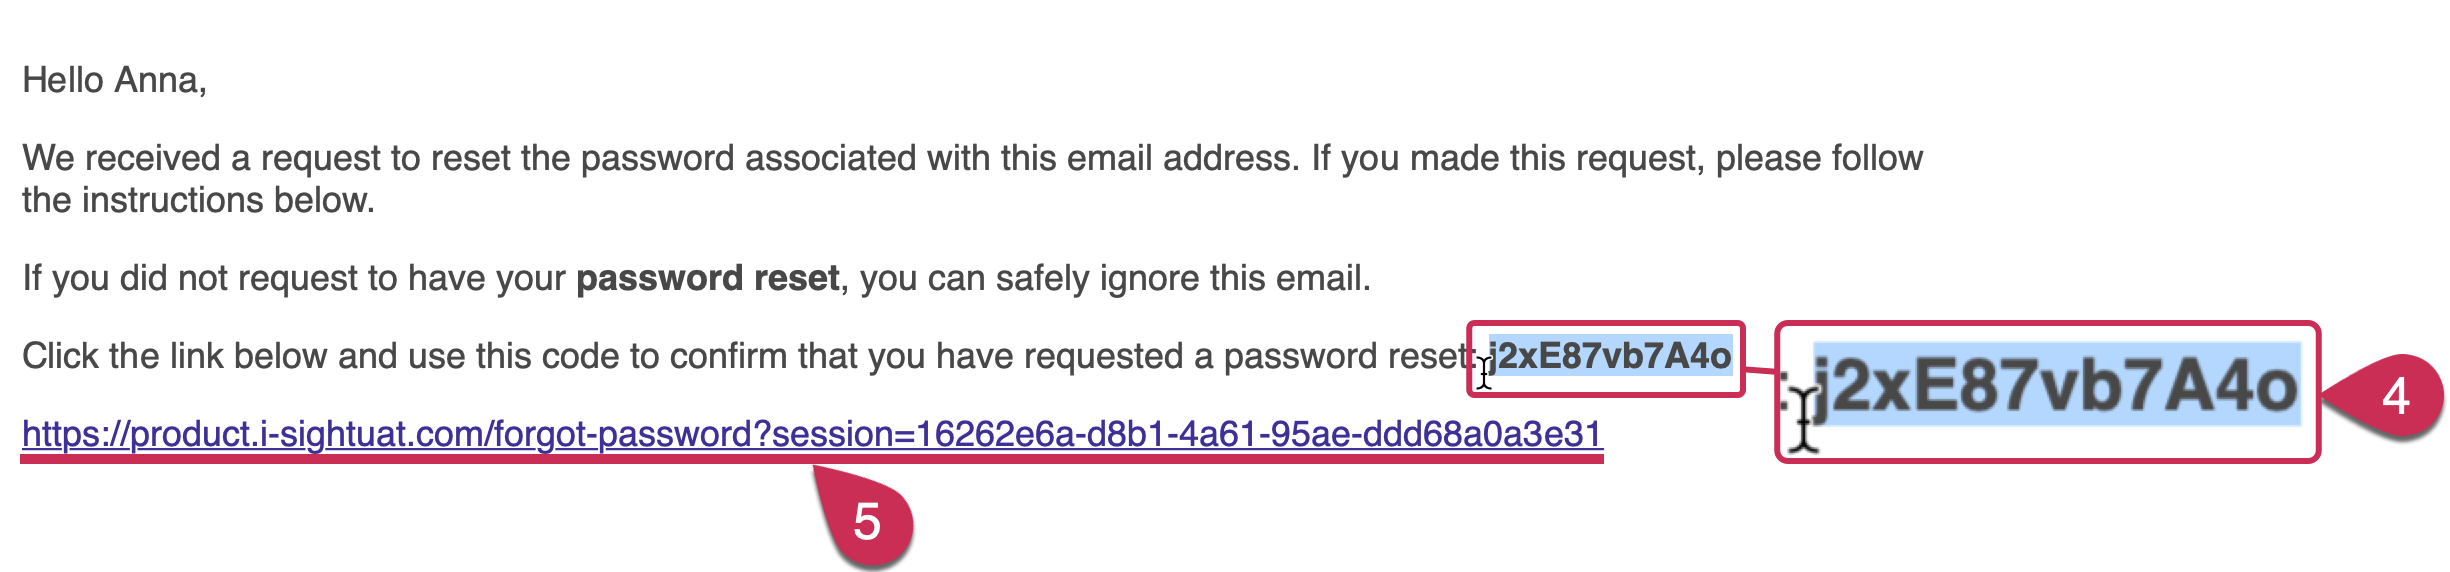 The Request Password Reset email with the verification code and link to your app.